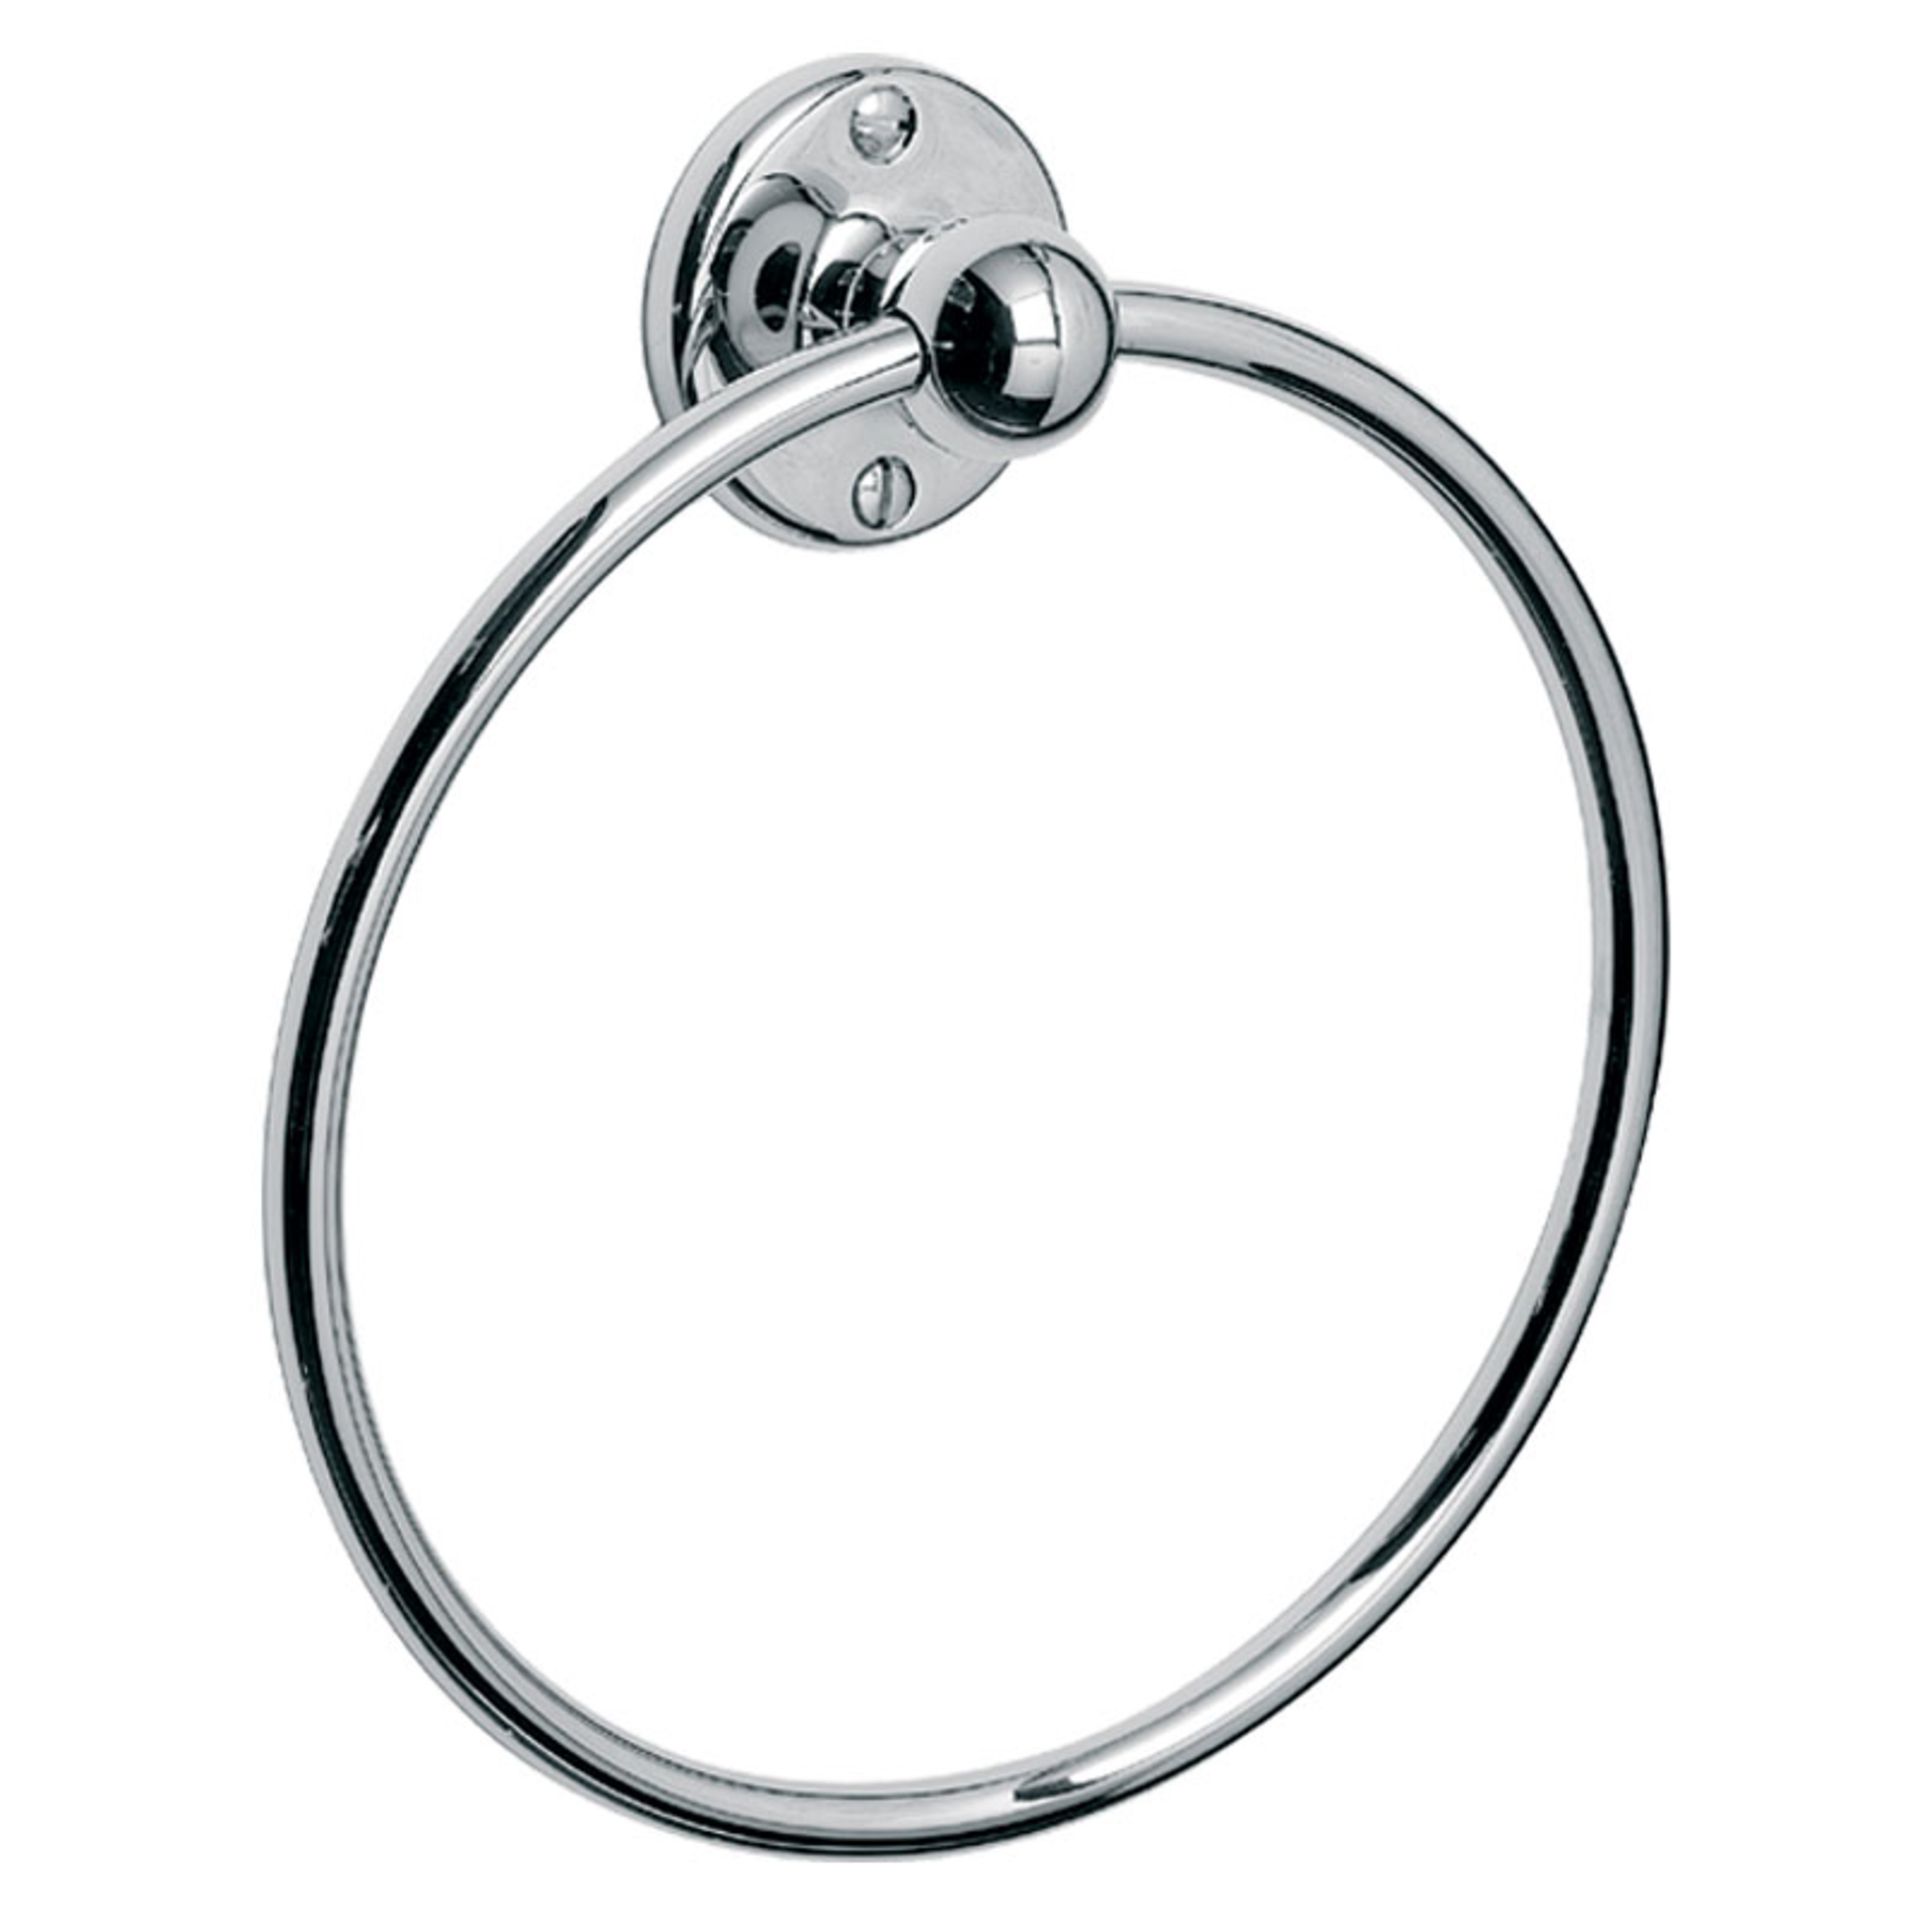 (I32) Eva Wavy Silver Towel Ring - Add that modern sleek finish to your bathroom, to give it that